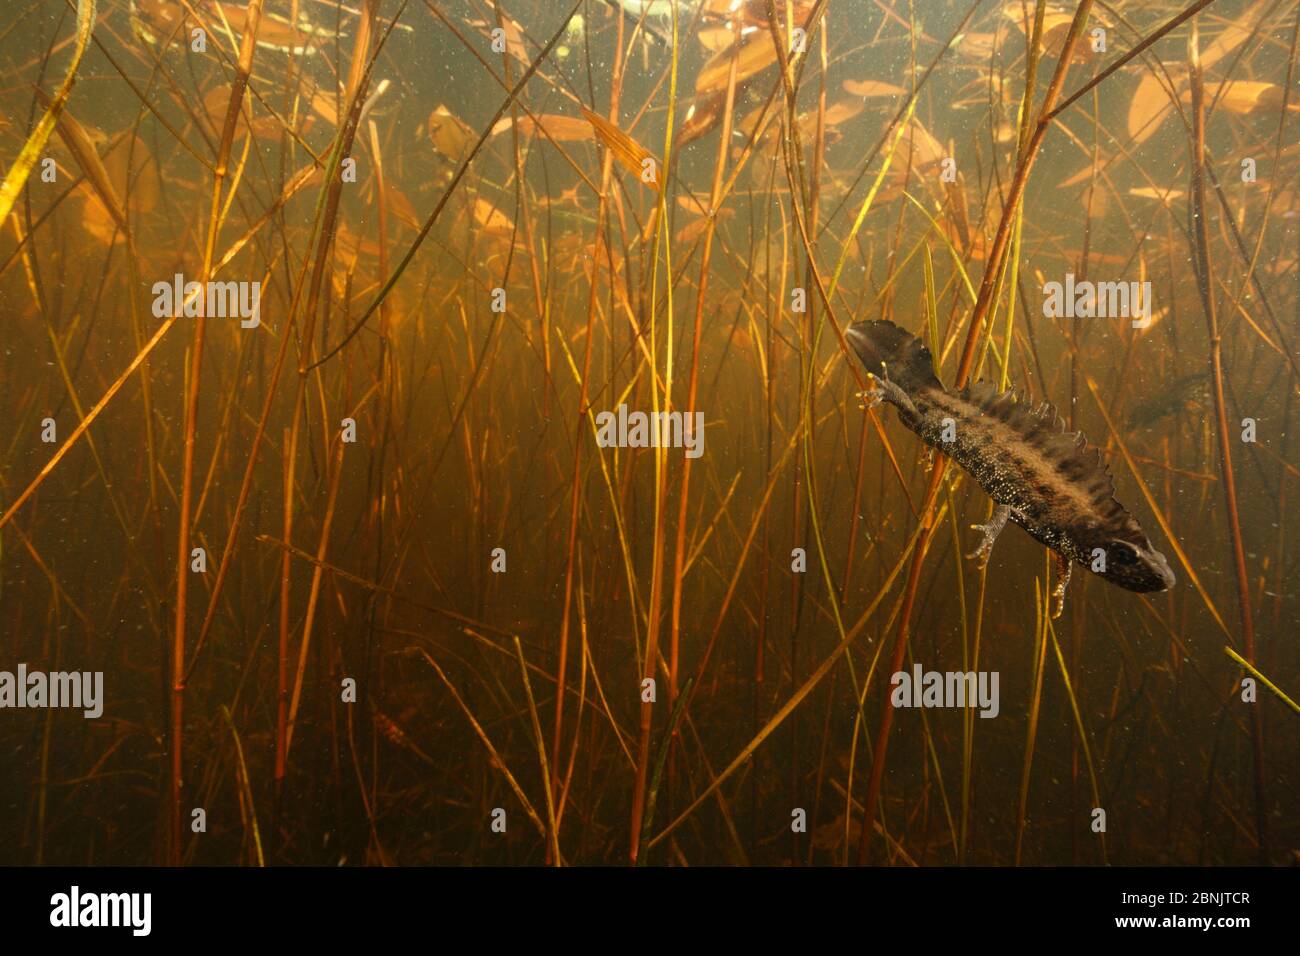 Crested newt (Triturus cristatus carnifex) male in pond, Burgundy. France, April. Stock Photo